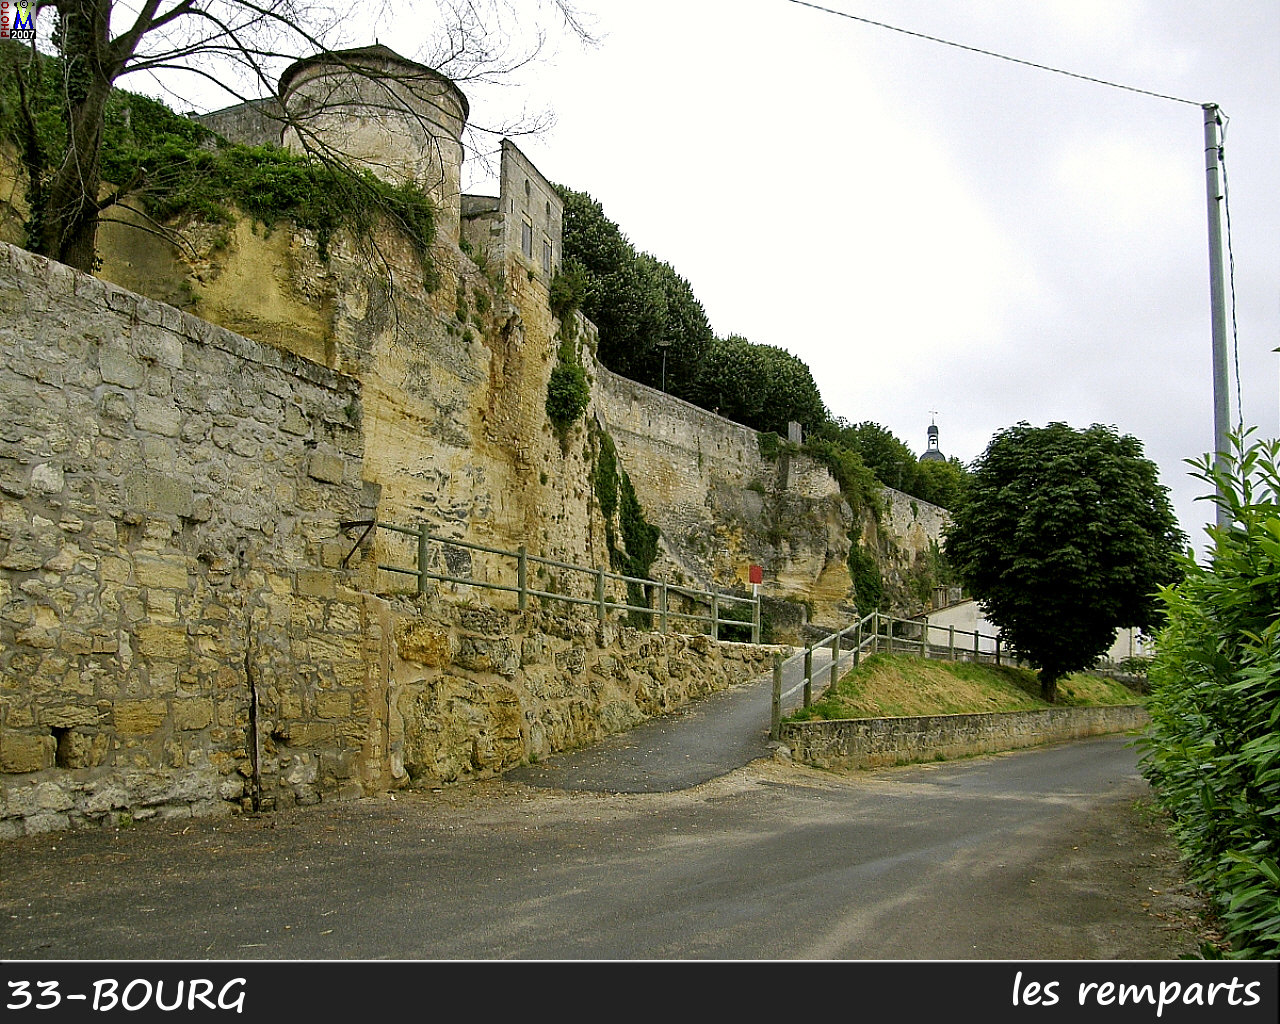 33BOURG_remparts_102.jpg